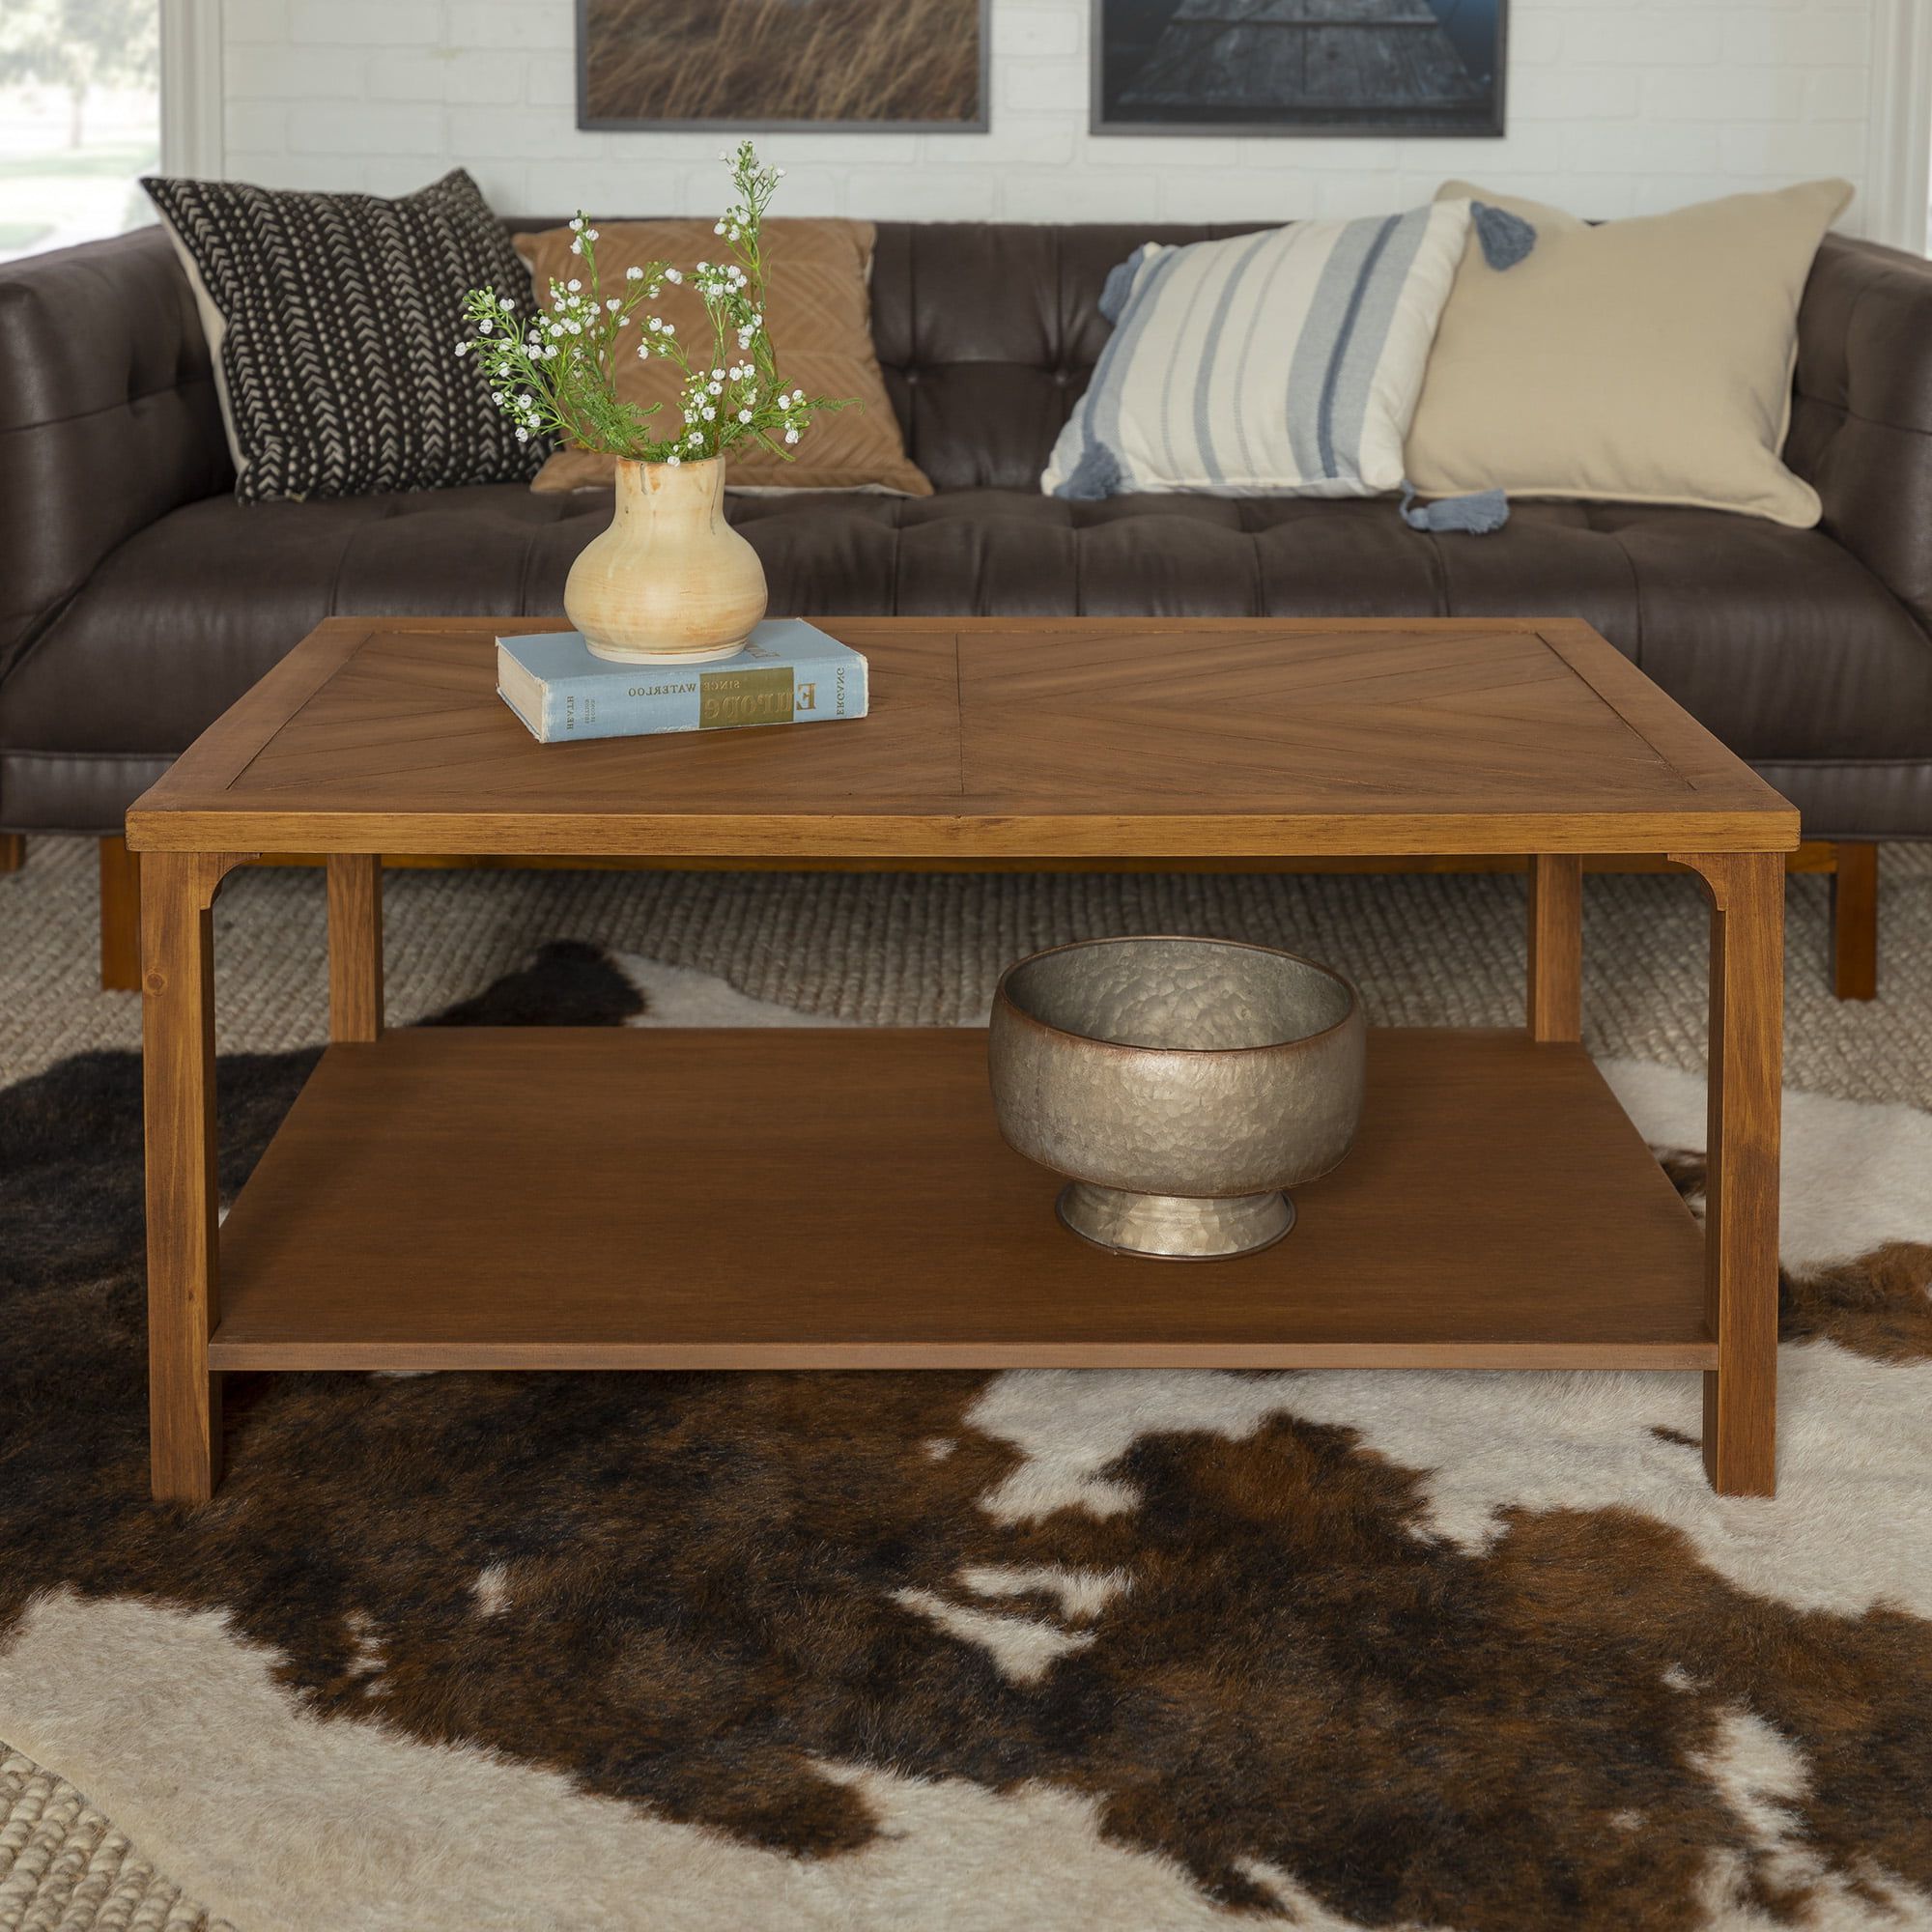 Most Recently Released Modern Farmhouse Coffee Table Sets Regarding Manor Park Modern Farmhouse Coffee Table With Chevron Design – Caramel (View 15 of 15)